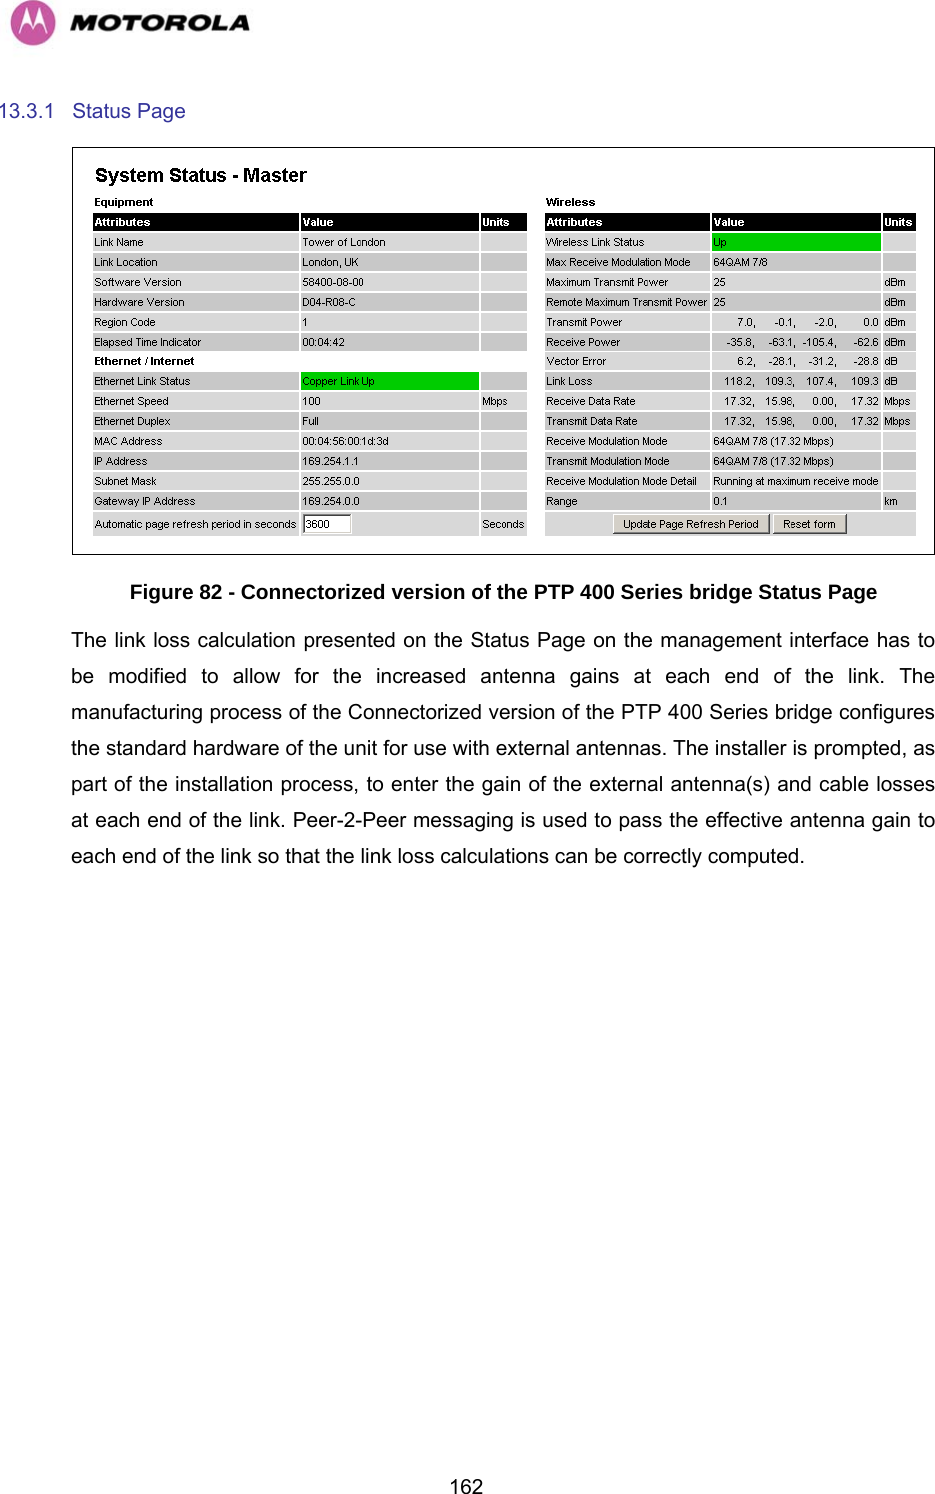   16213.3.1 Status Page  Figure 82 - Connectorized version of the PTP 400 Series bridge Status Page The link loss calculation presented on the Status Page on the management interface has to be modified to allow for the increased antenna gains at each end of the link. The manufacturing process of the Connectorized version of the PTP 400 Series bridge configures the standard hardware of the unit for use with external antennas. The installer is prompted, as part of the installation process, to enter the gain of the external antenna(s) and cable losses at each end of the link. Peer-2-Peer messaging is used to pass the effective antenna gain to each end of the link so that the link loss calculations can be correctly computed. 